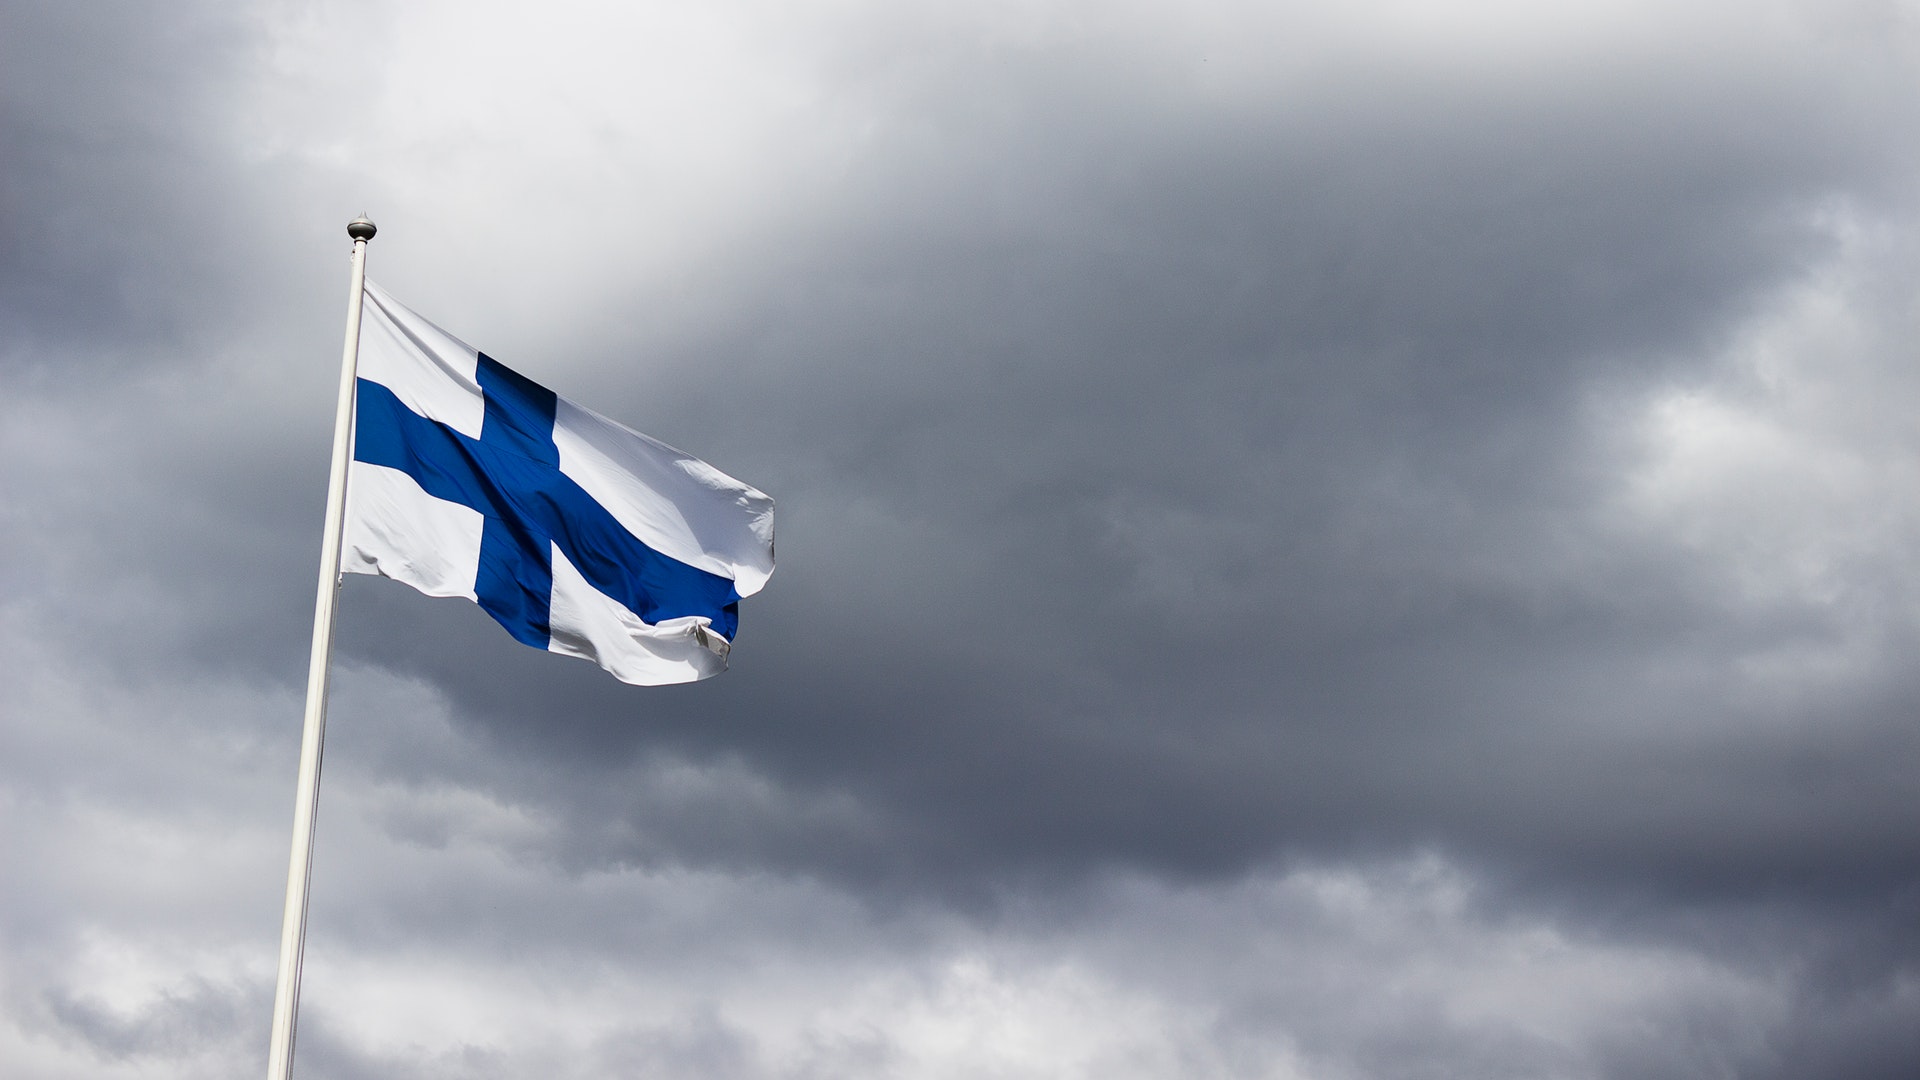 News from Finland and igaming sector